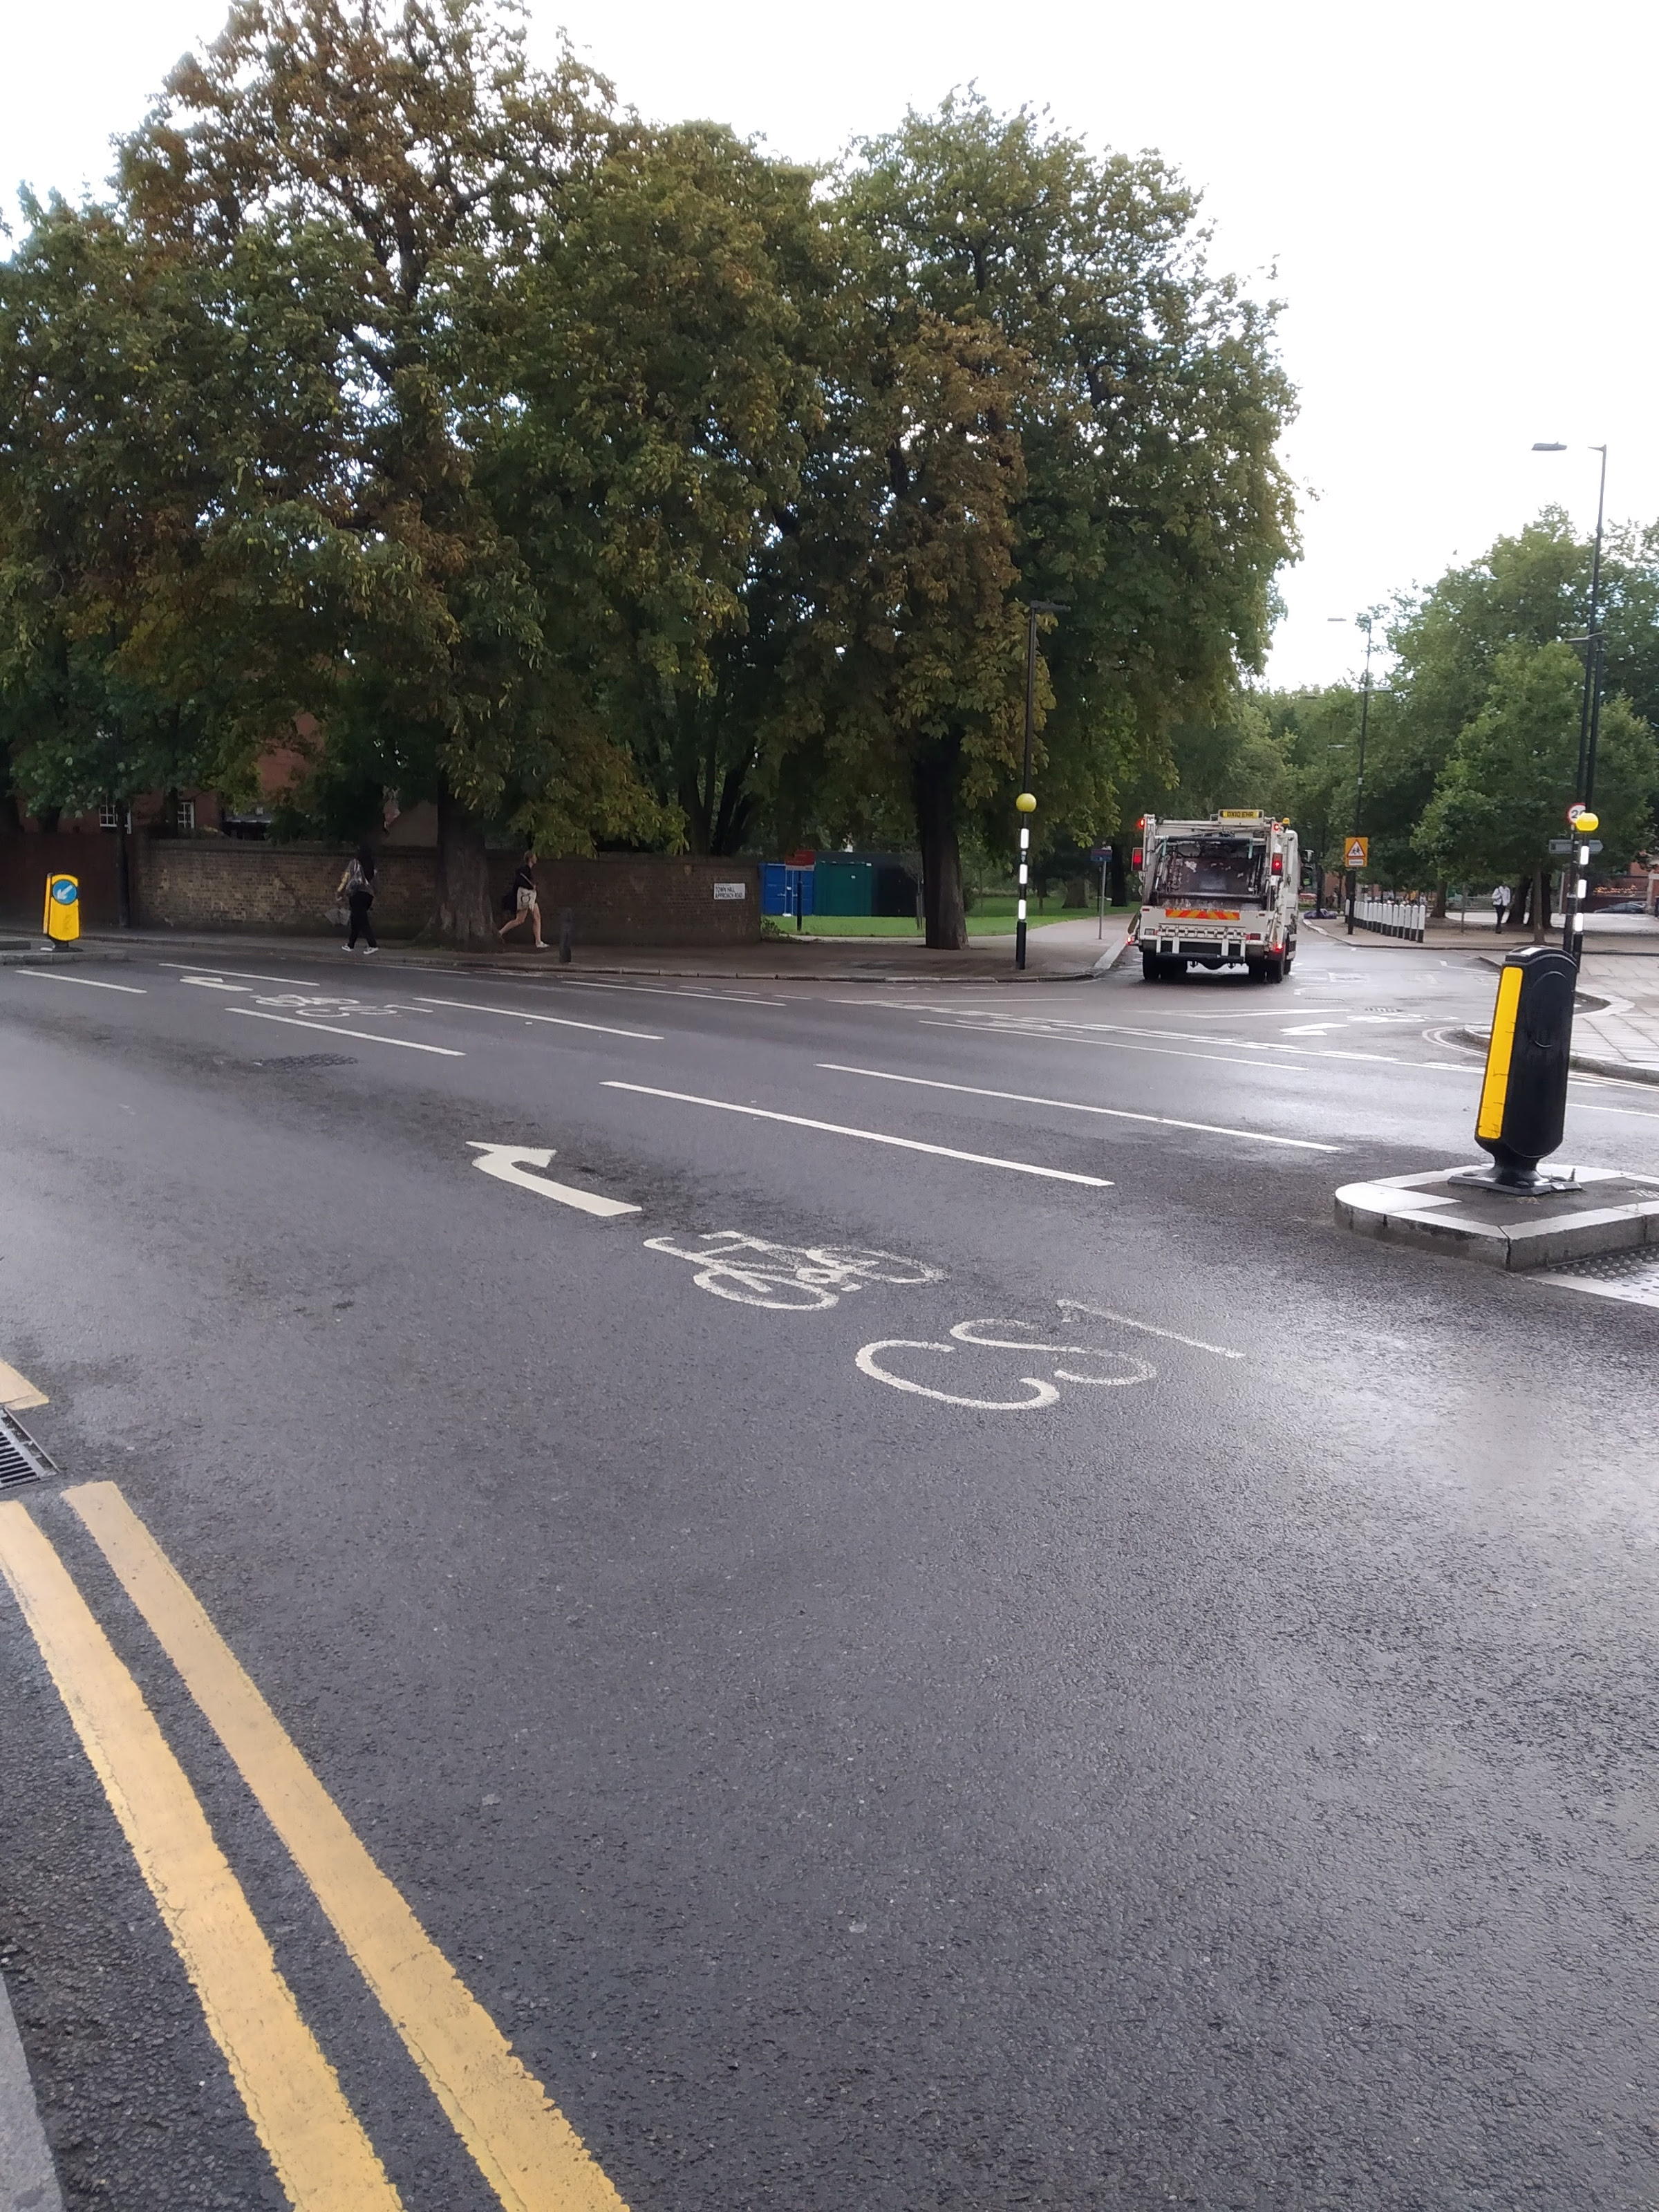 Southbound cyclists must cut across traffic to access Town Hall Approach Road, where the route continues